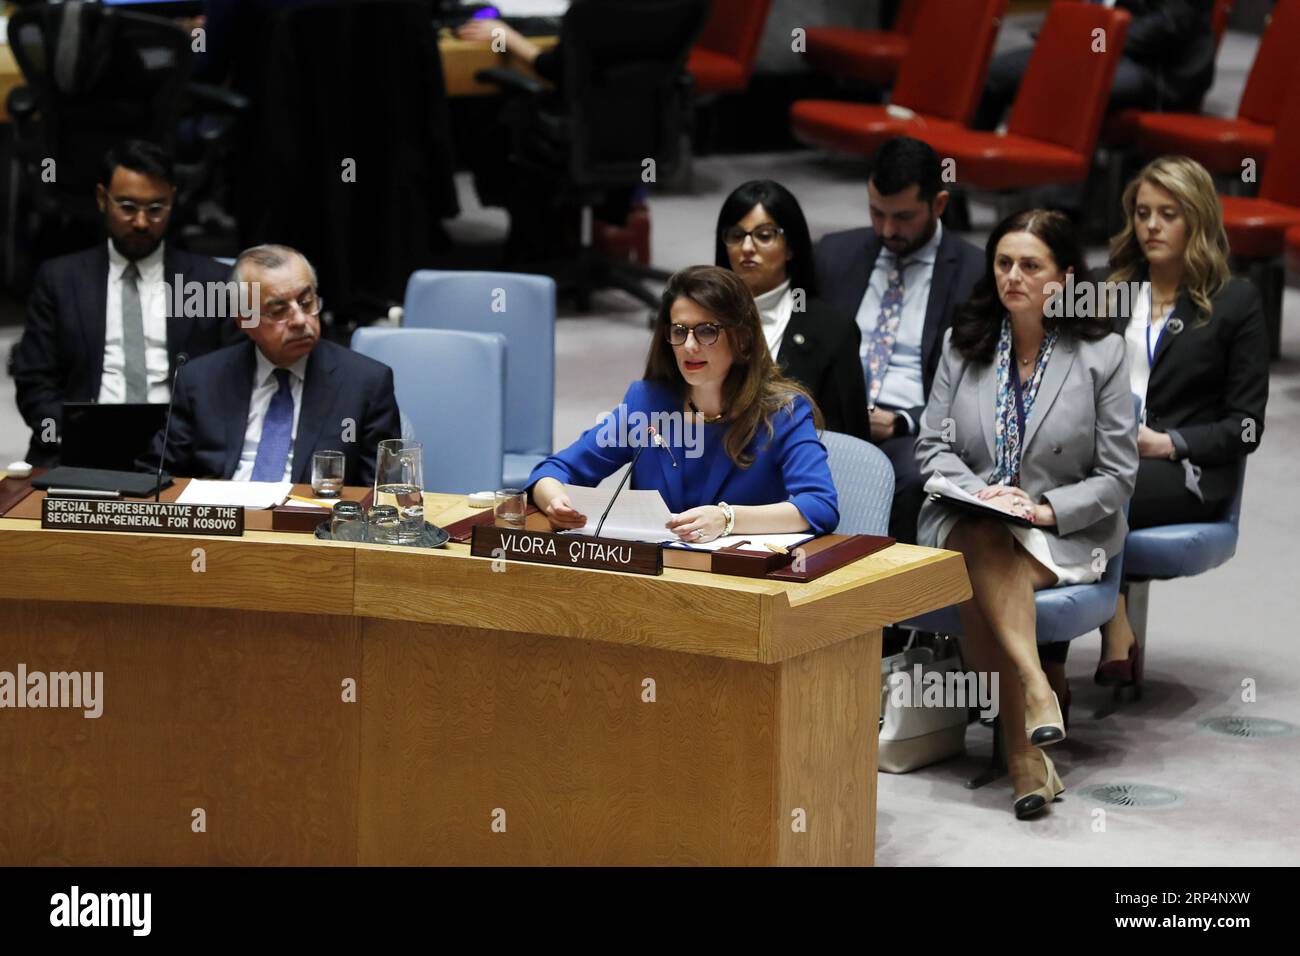 News Bilder des Tages (181114) -- UNITED NATIONS, Nov. 14, 2018 -- Vlora Citaku (R, Front), representative of Kosovo, addresses a Security Council meeting on Kosovo at the UN headquarters in New York, on Nov. 14, 2018. The top UN envoy in Kosovo on Wednesday called for social engagement for the success of negotiations on a possible new comprehensive agreement between Pristina and Belgrade. ) UN-SECURITY COUNCIL-MEETING-KOSOVO LixMuzi PUBLICATIONxNOTxINxCHN Stock Photo